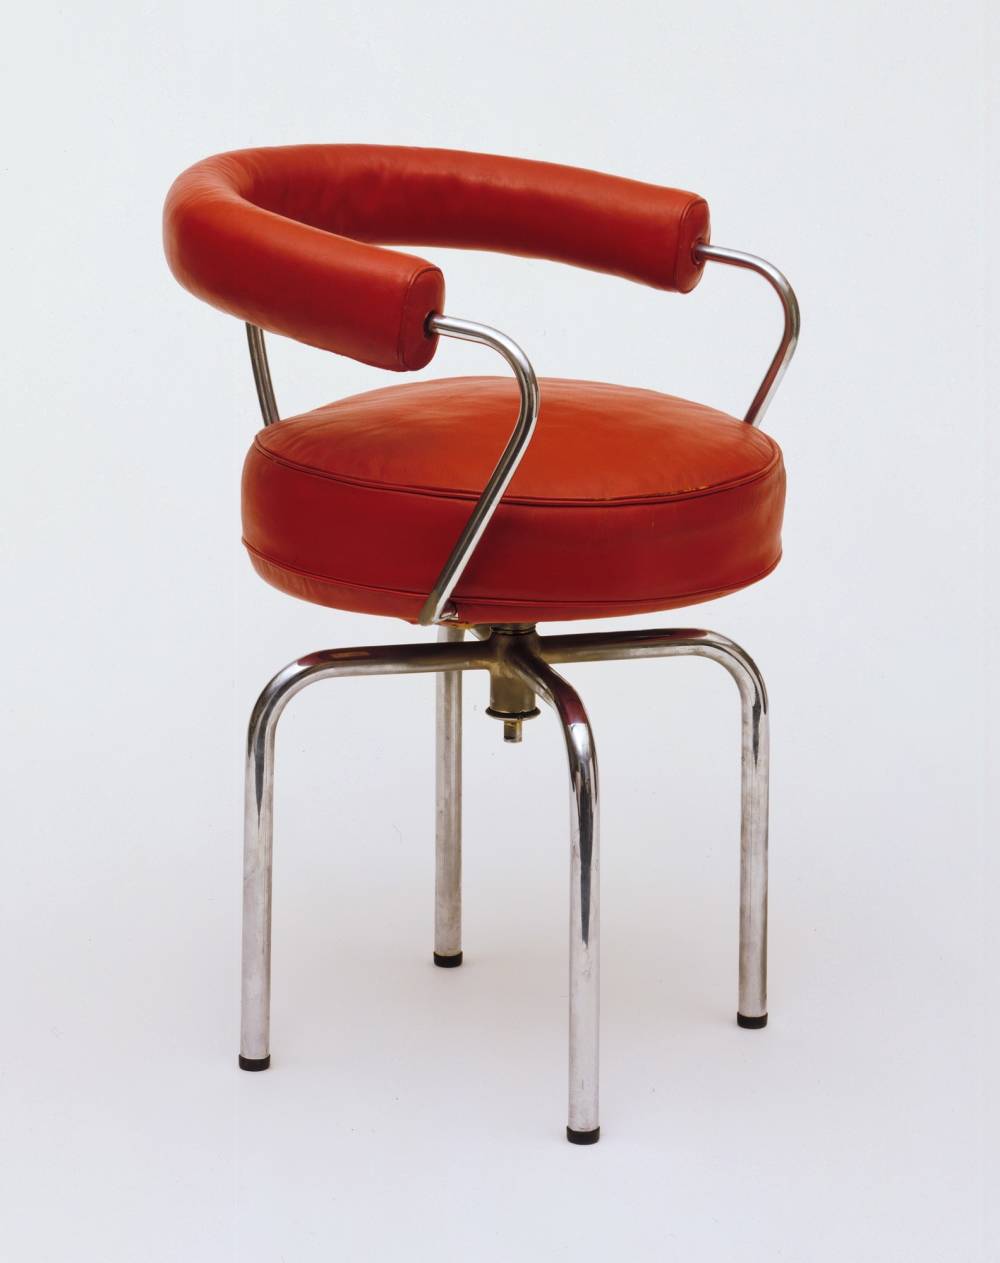 Charlotte perriand  le corbusier  charles e  douard jeanneret   pierre jeanneret  revolving armchair  1928